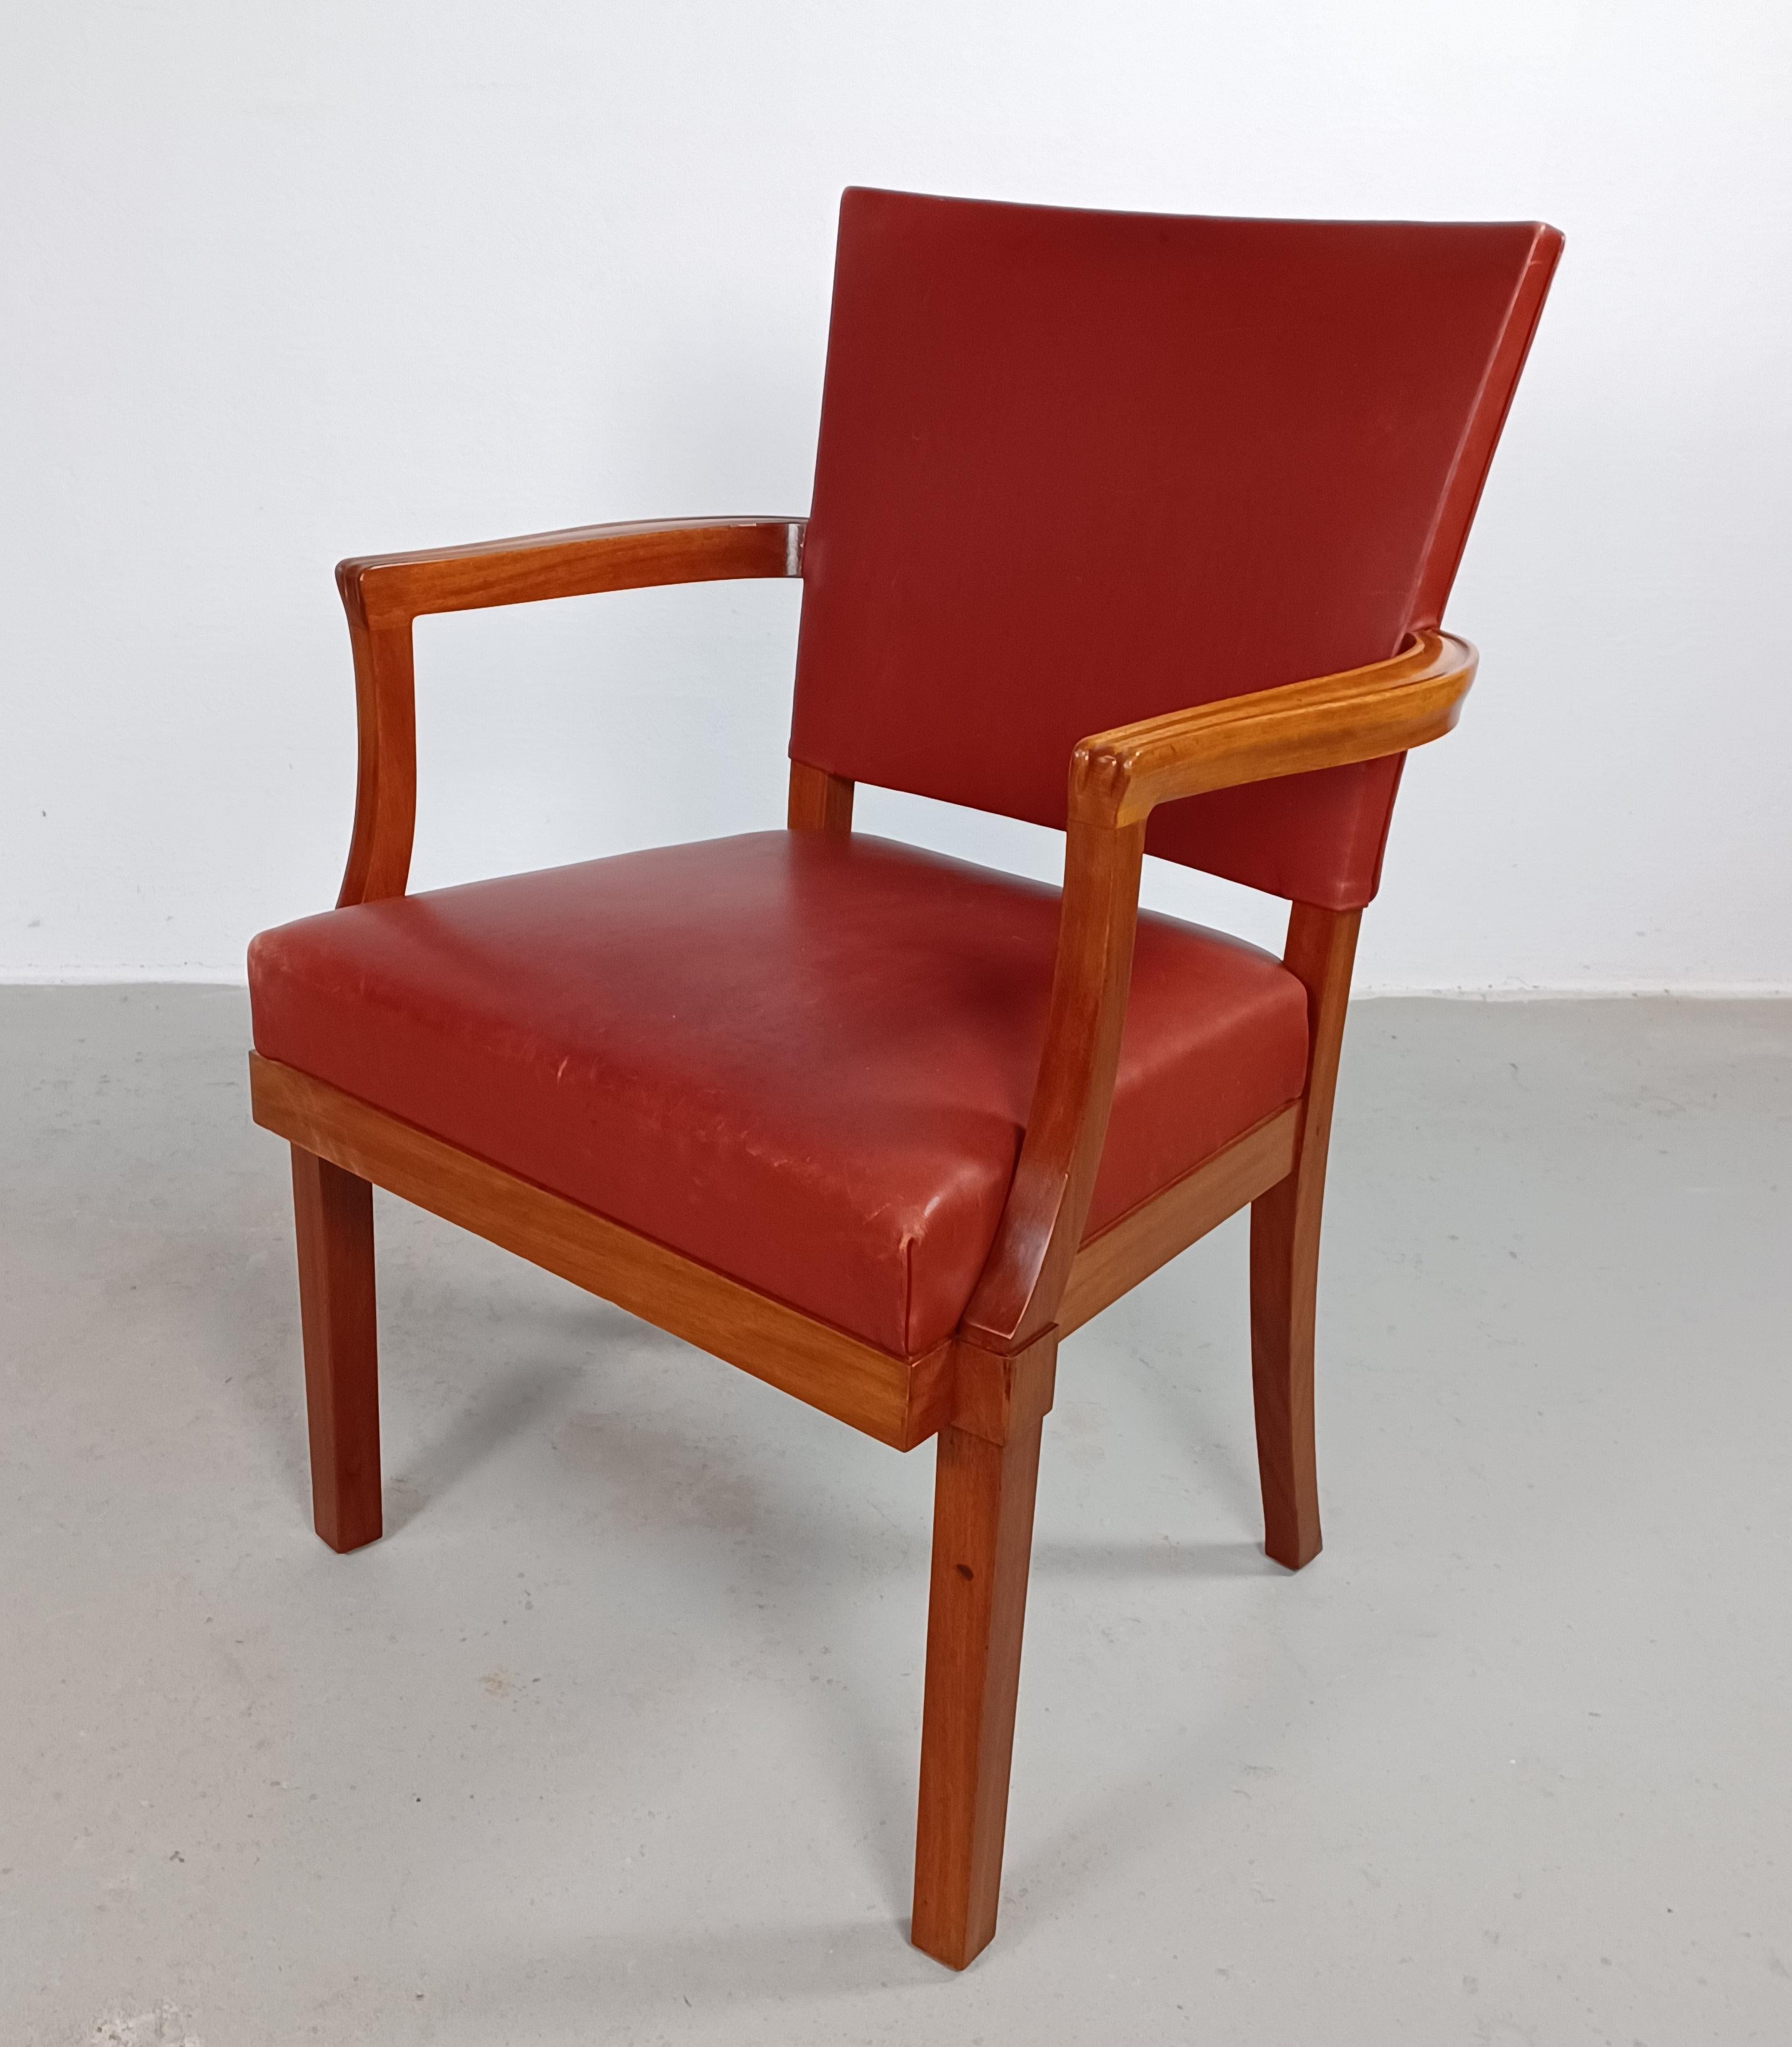 1935 Set of Two Restored Kaare Klint Barcelona or The Red Chair by Rud Rasmussen In Good Condition For Sale In Knebel, DK